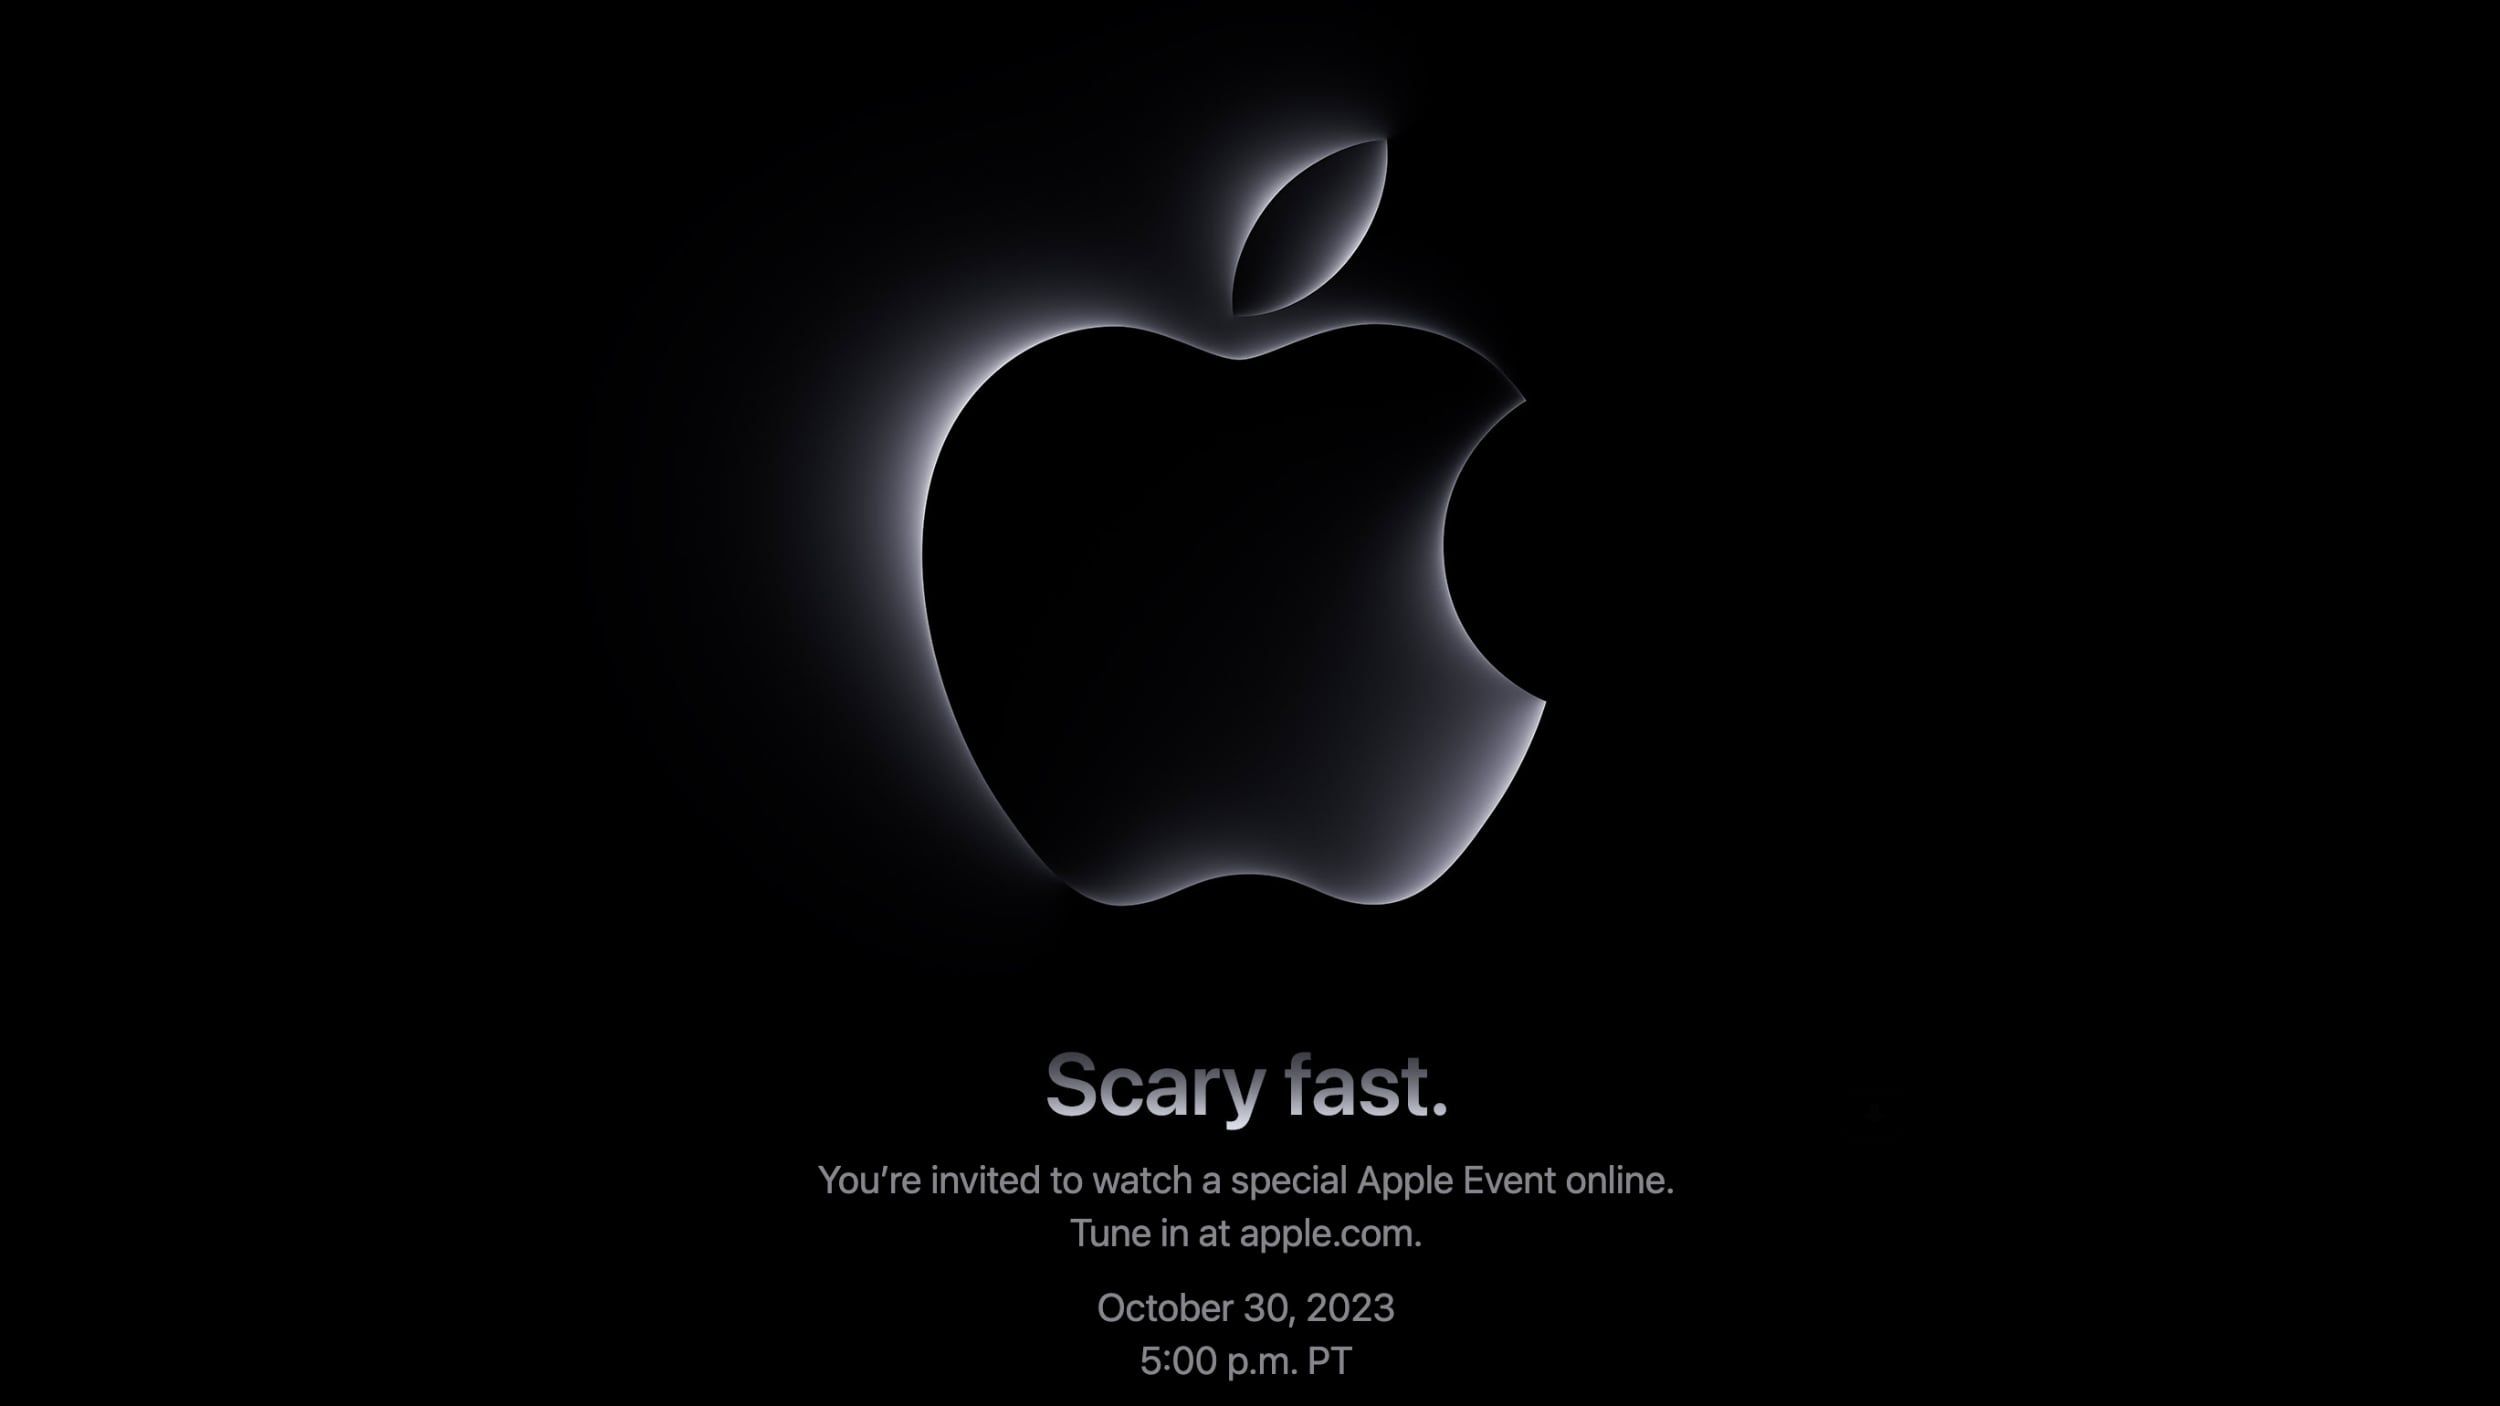 Apple Announces October Event for Macs: 'Scary Fast' thumbnail